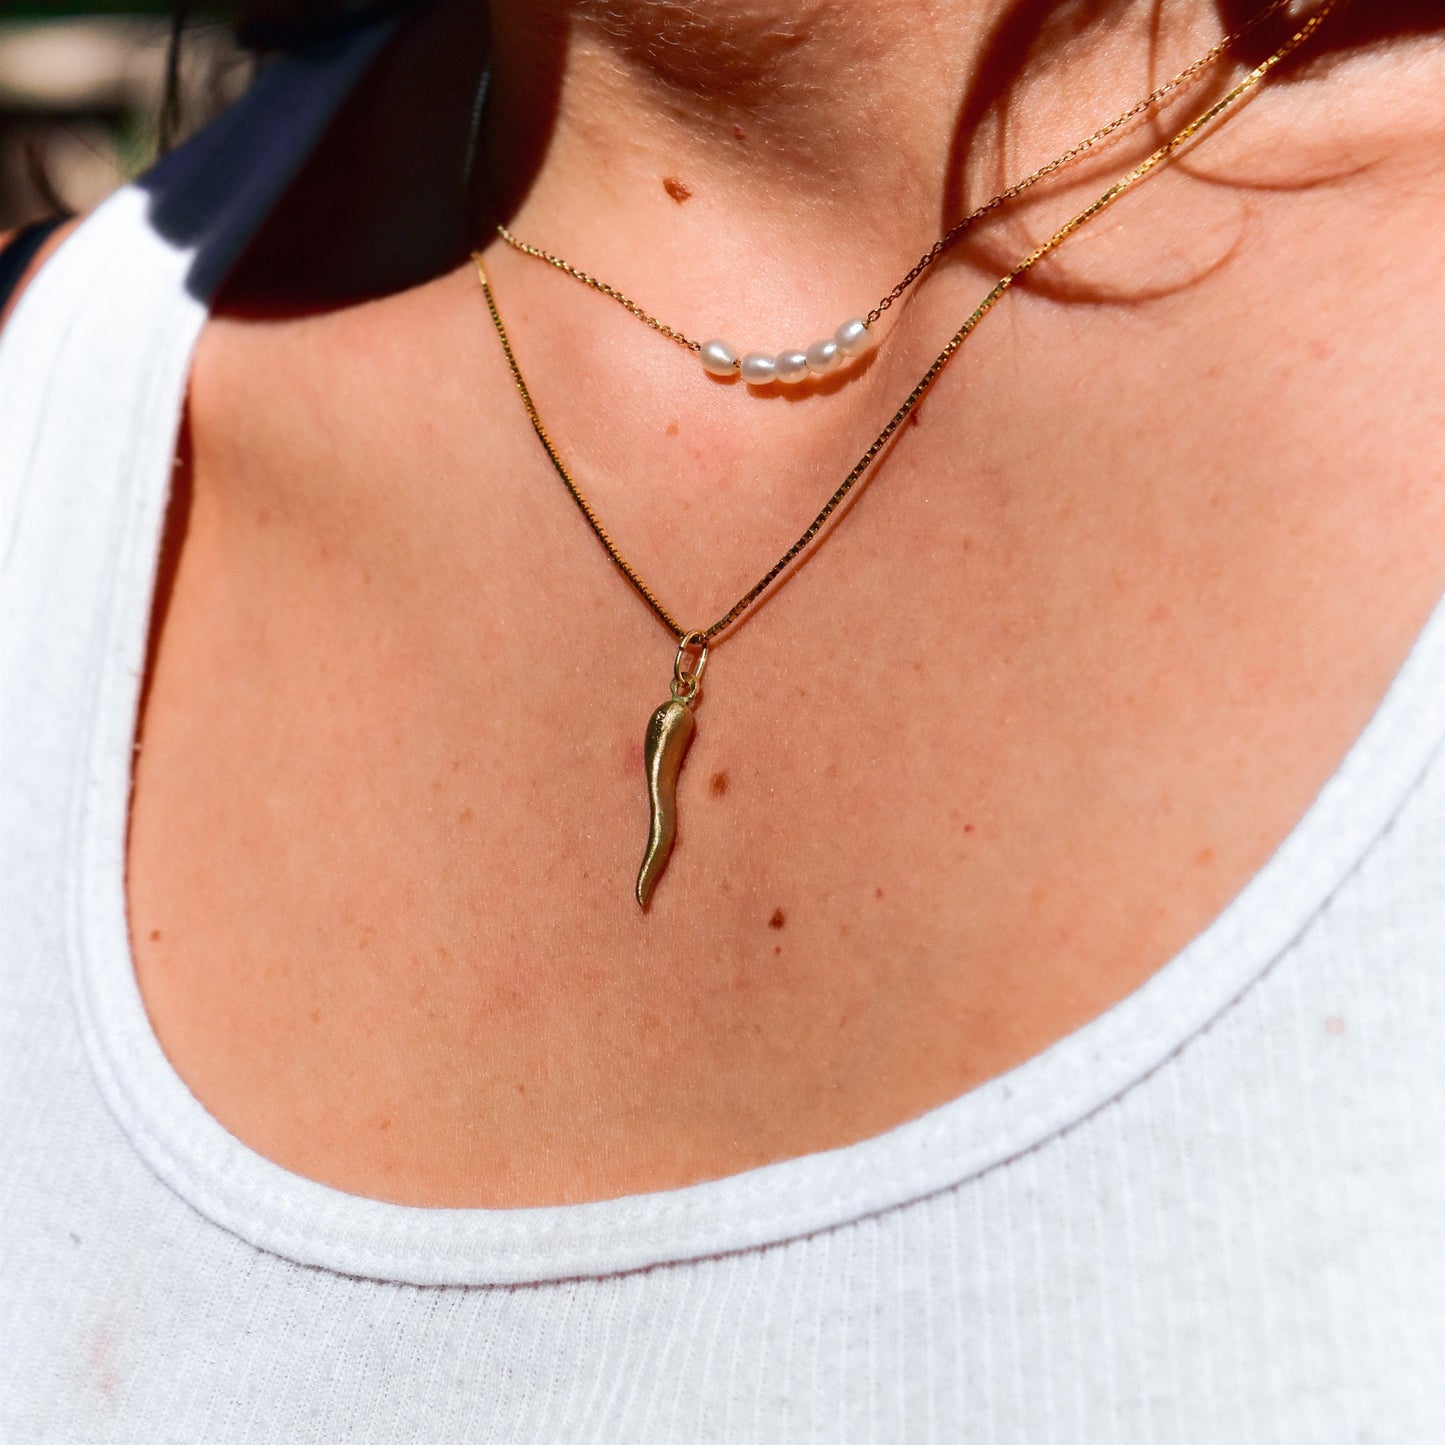 14K brushed yellow gold Italian horn charm necklace worn on a woman's neck, showing a cute mini puffed cornicello pendant - a vintage good luck charm measuring 26mm in size.